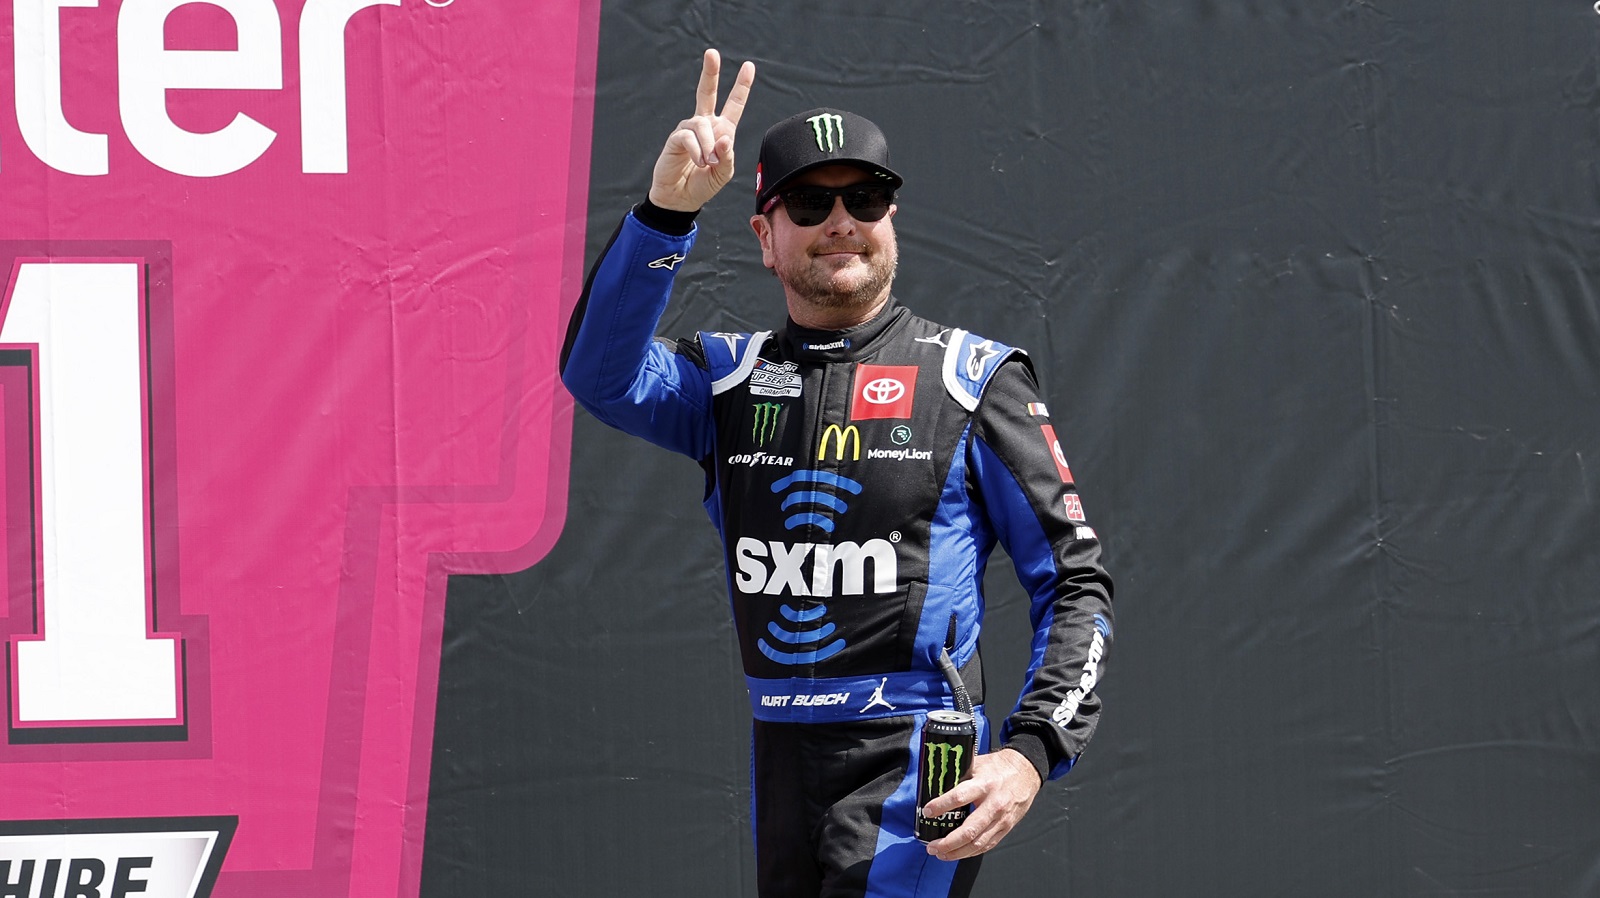 Dale Earnhardt Jr. On Kurt Busch: ‘1 Day You Wake Up and the Wires Are Back Together’